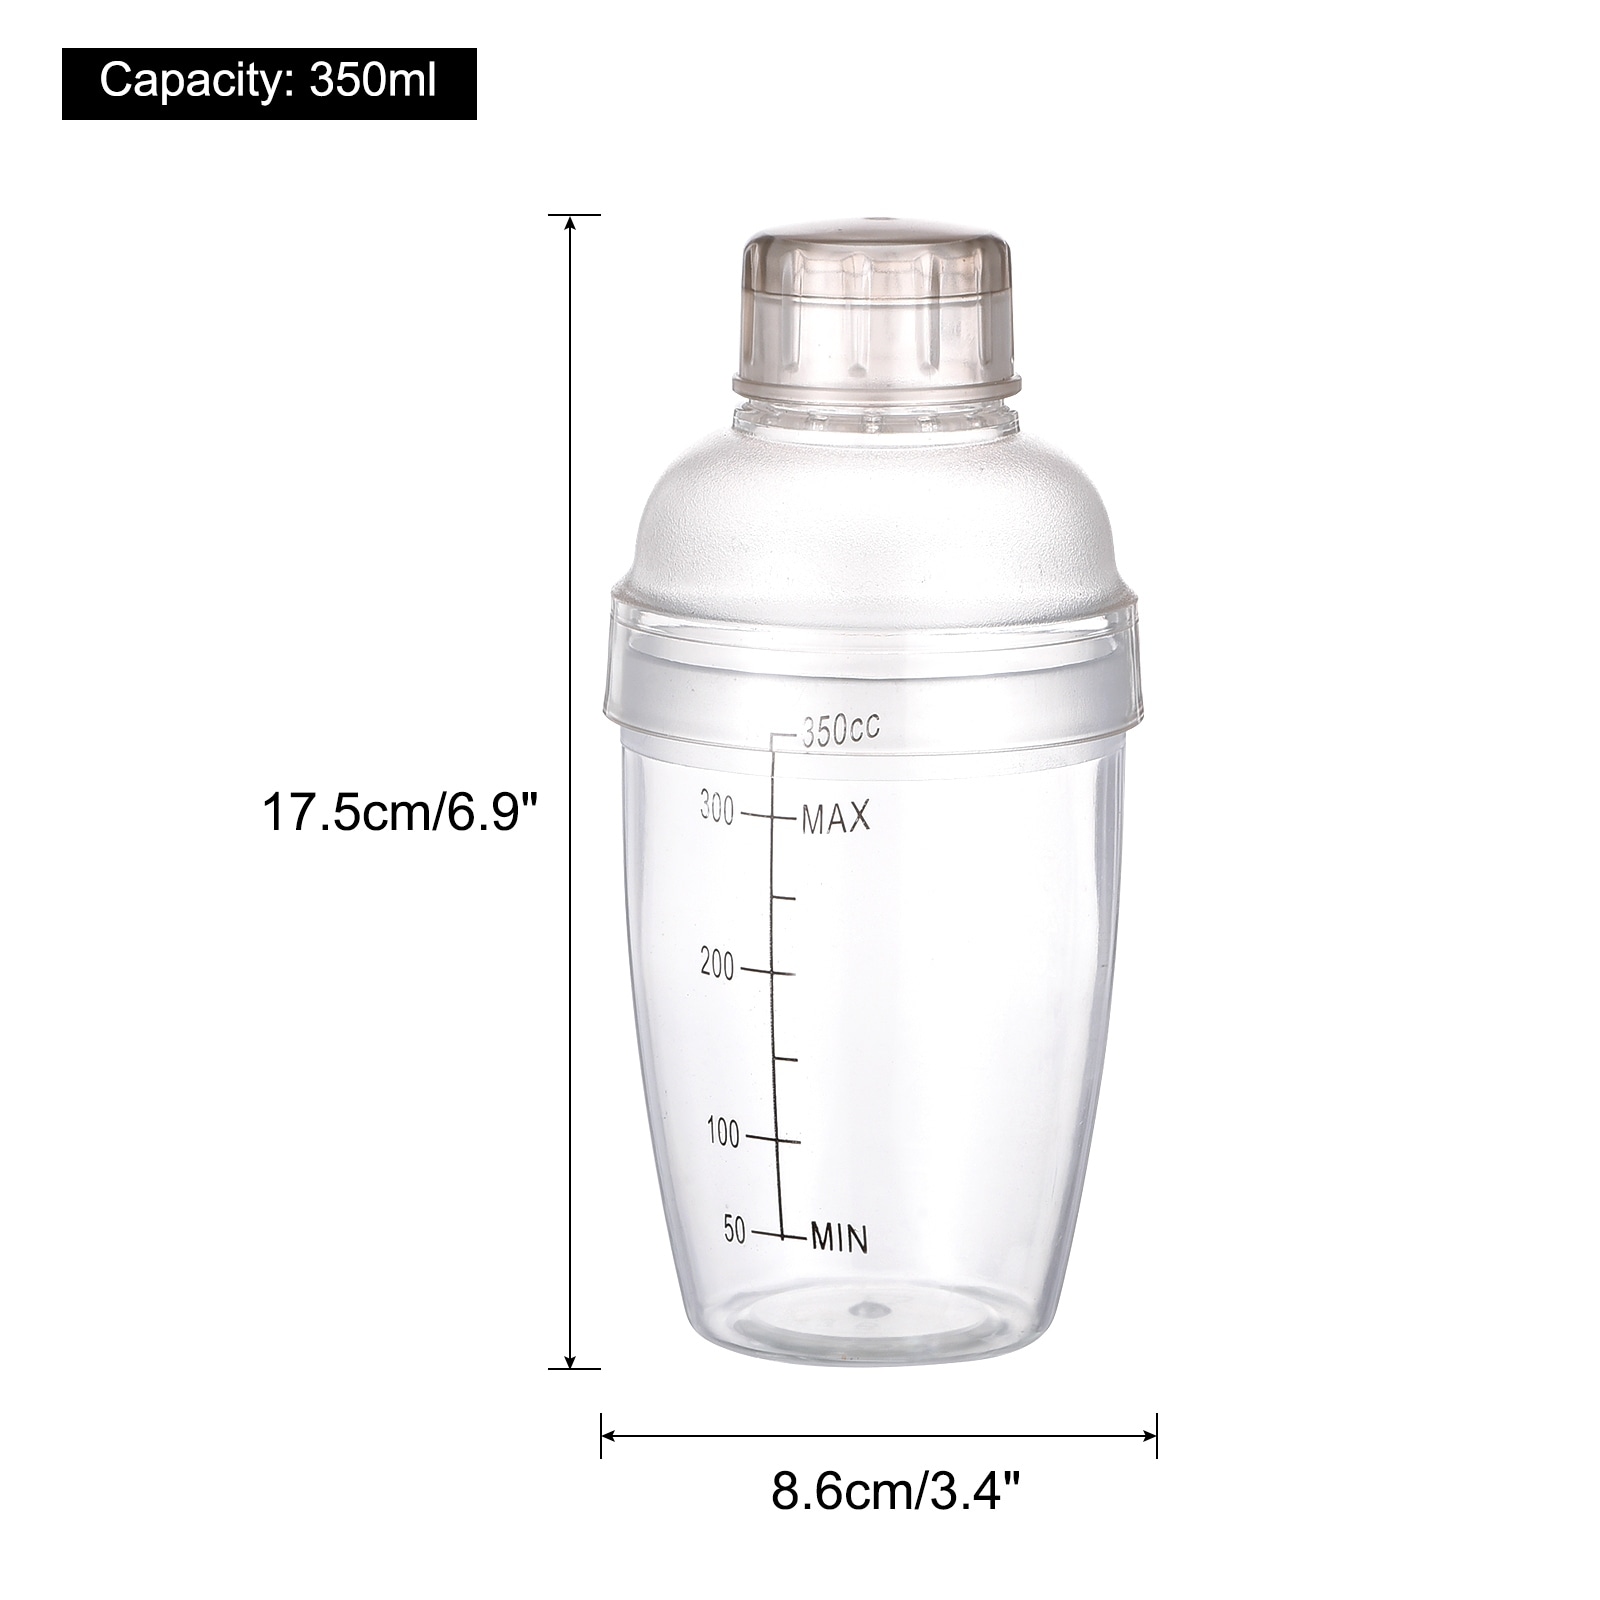 https://ak1.ostkcdn.com/images/products/is/images/direct/21005d6346bda3ea2a0a35e6dbc786a5b776939e/350ml-Plastic-Cocktail-Shaker-Cup-Scale-Wine-Beverage-Mixer-Drink-Tools.jpg